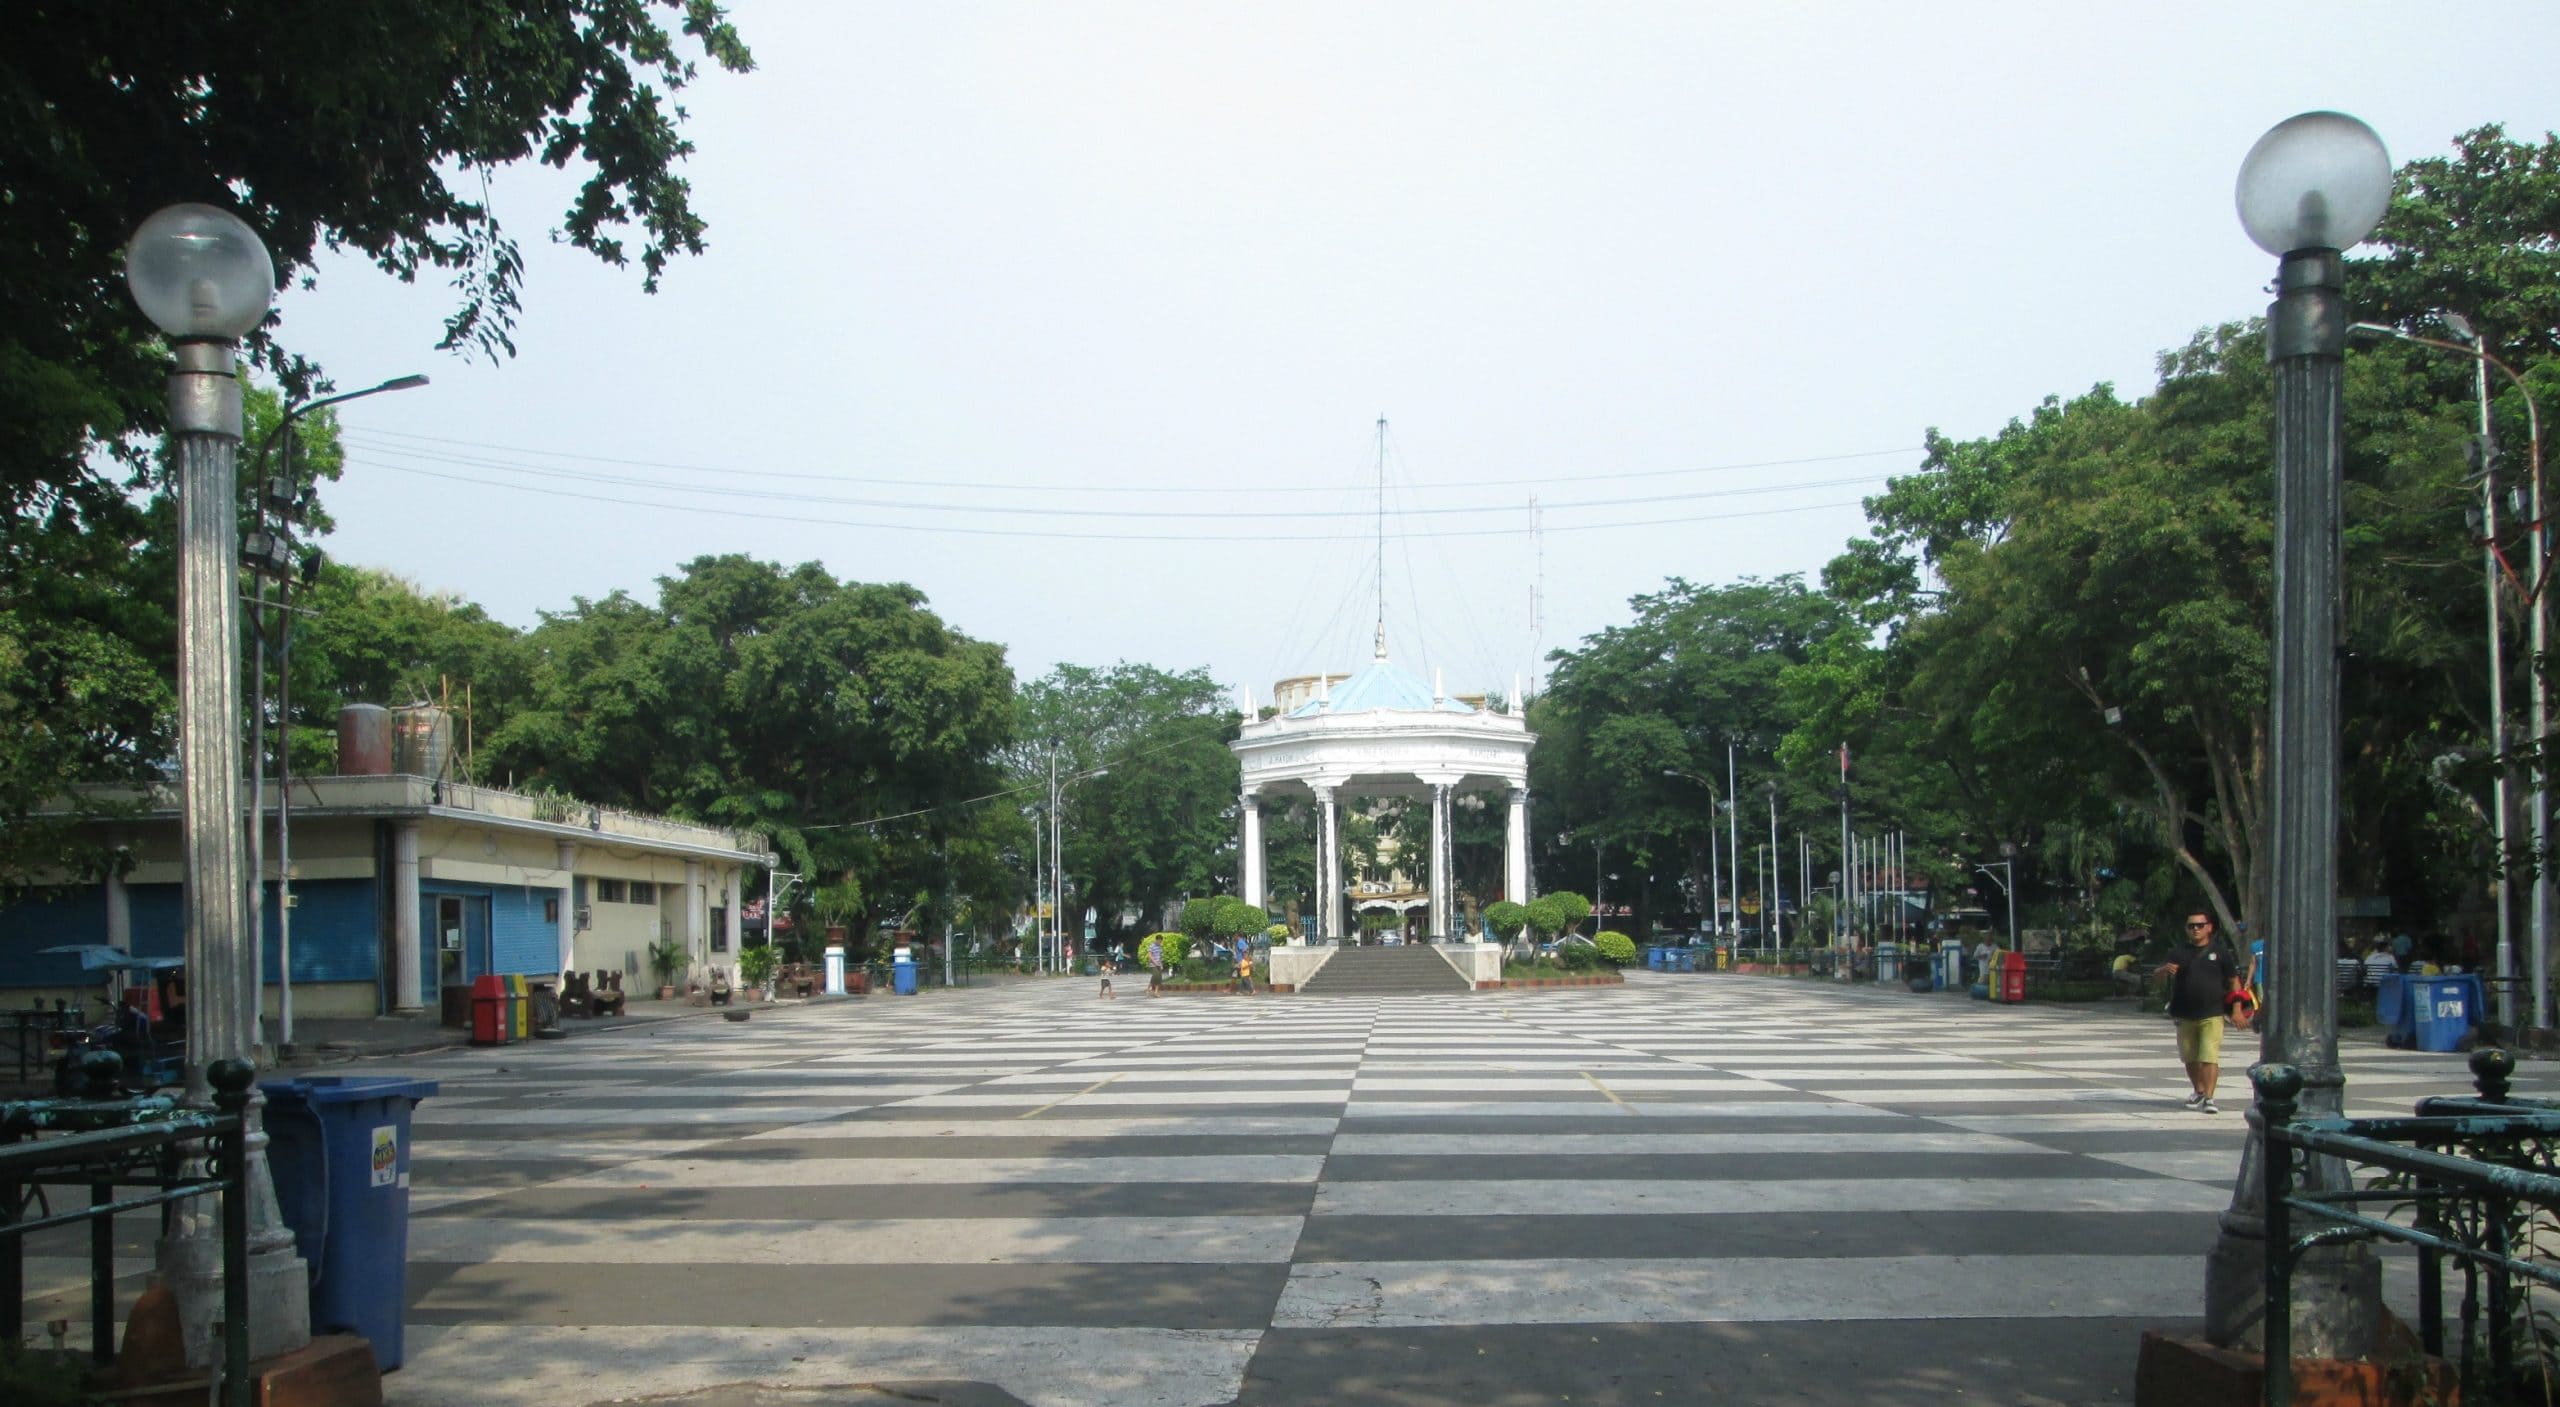 Bacolod Public Plaza, Bacolod tourist spots, things to do in Bacolod